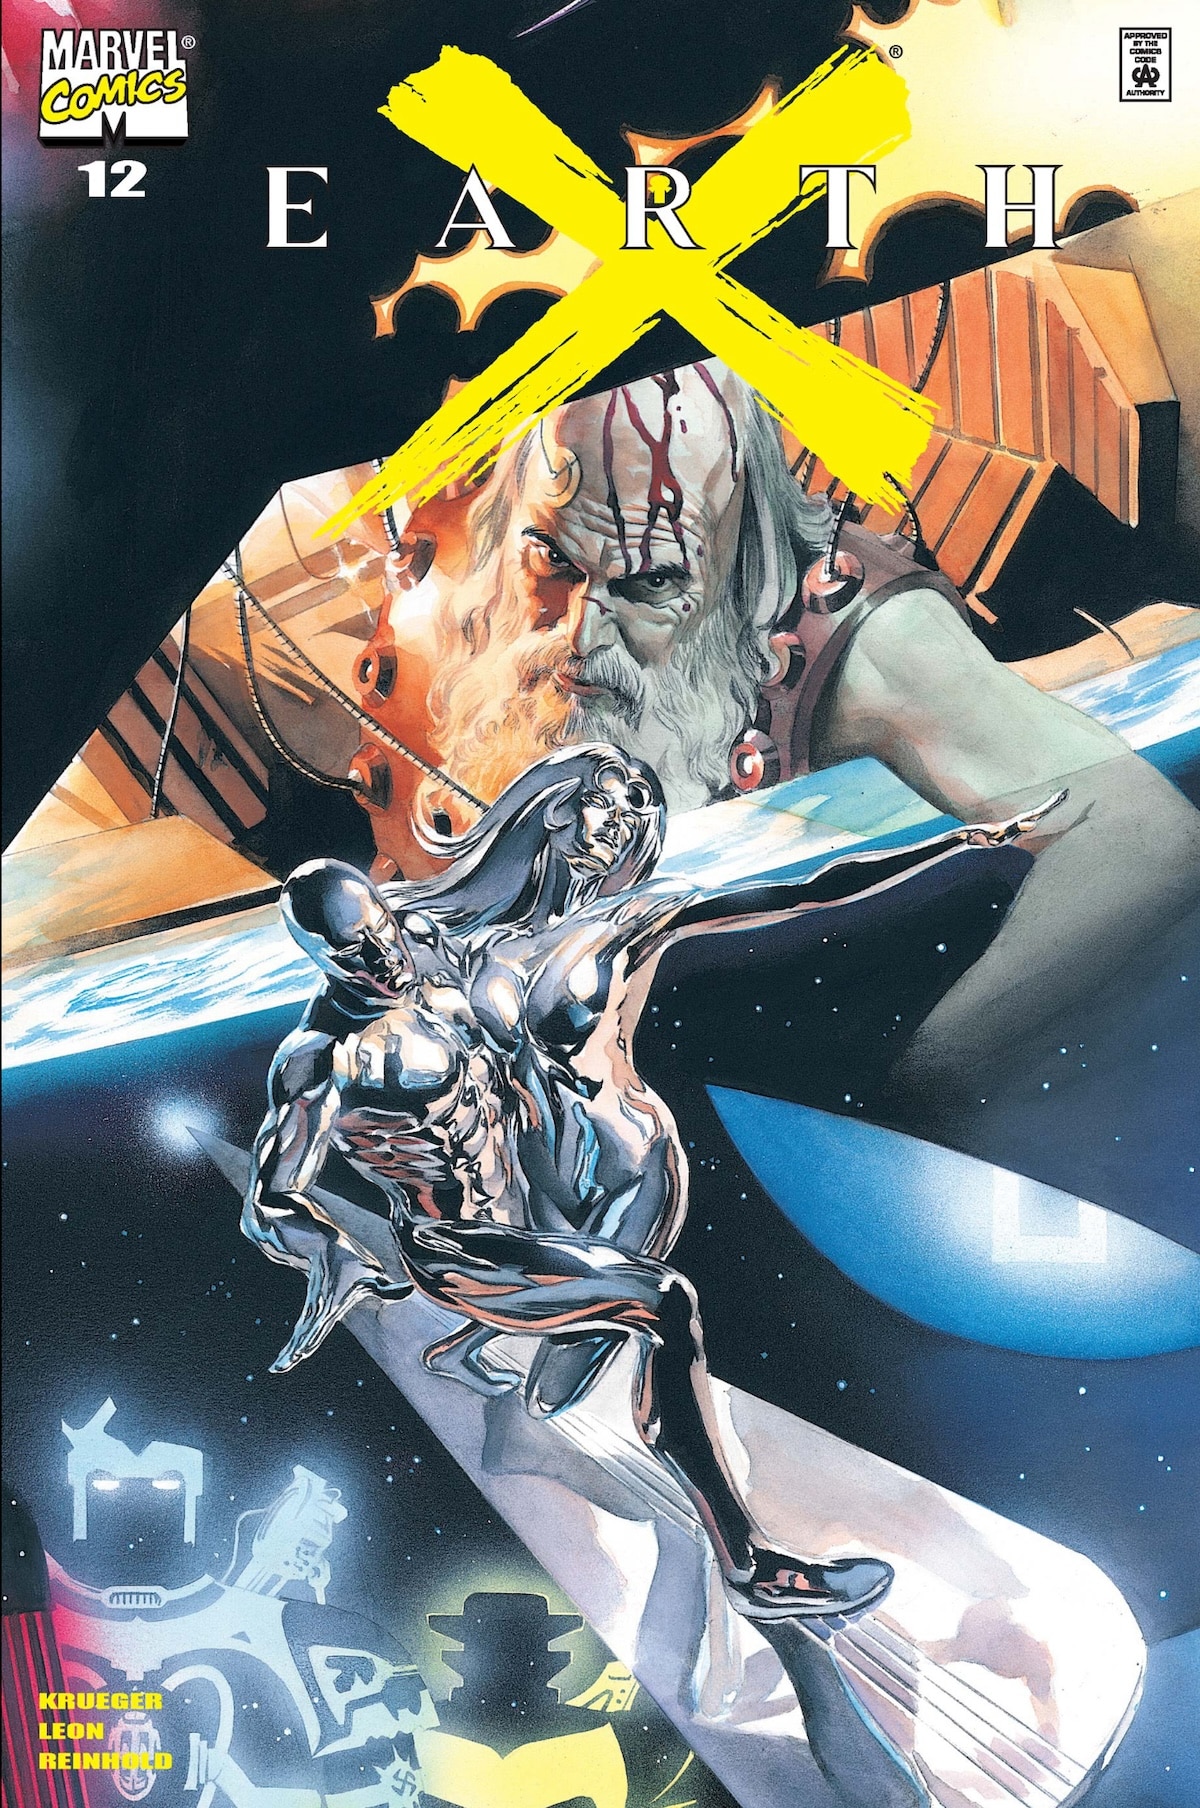 Silver Surfer and a silver Shalla-Bal in space.